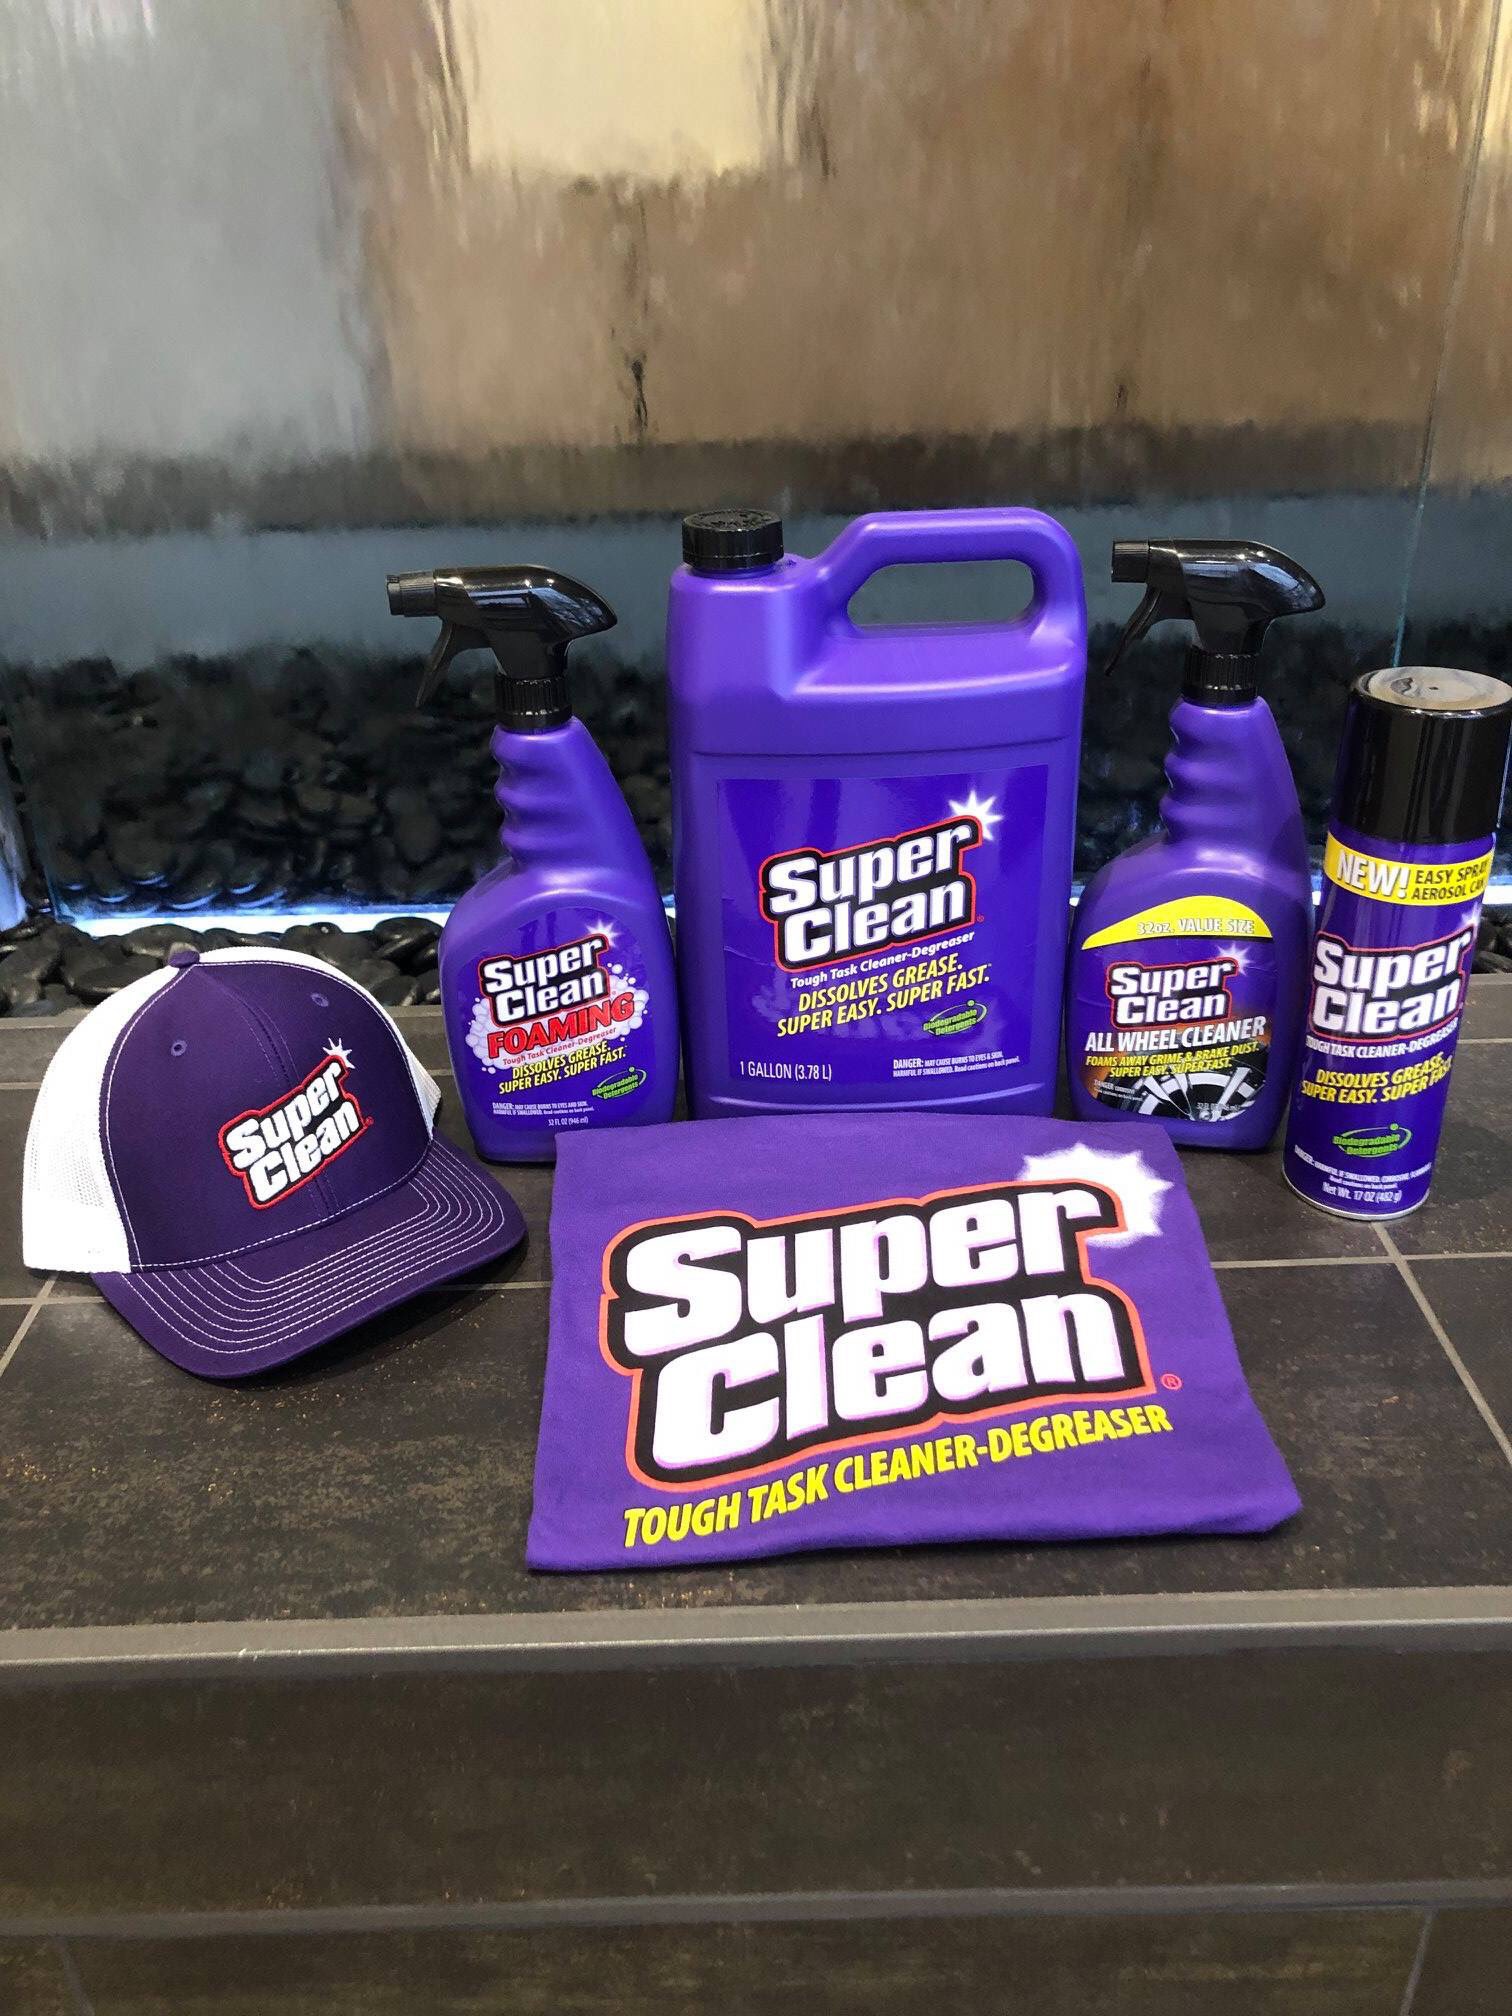 Super Clean - Your favorite Super Clean products are on sale now at your  local O'Reilly Auto Parts!! Buy One, Get One Free on our Original, Foaming,  Aerosol degreasers as well as